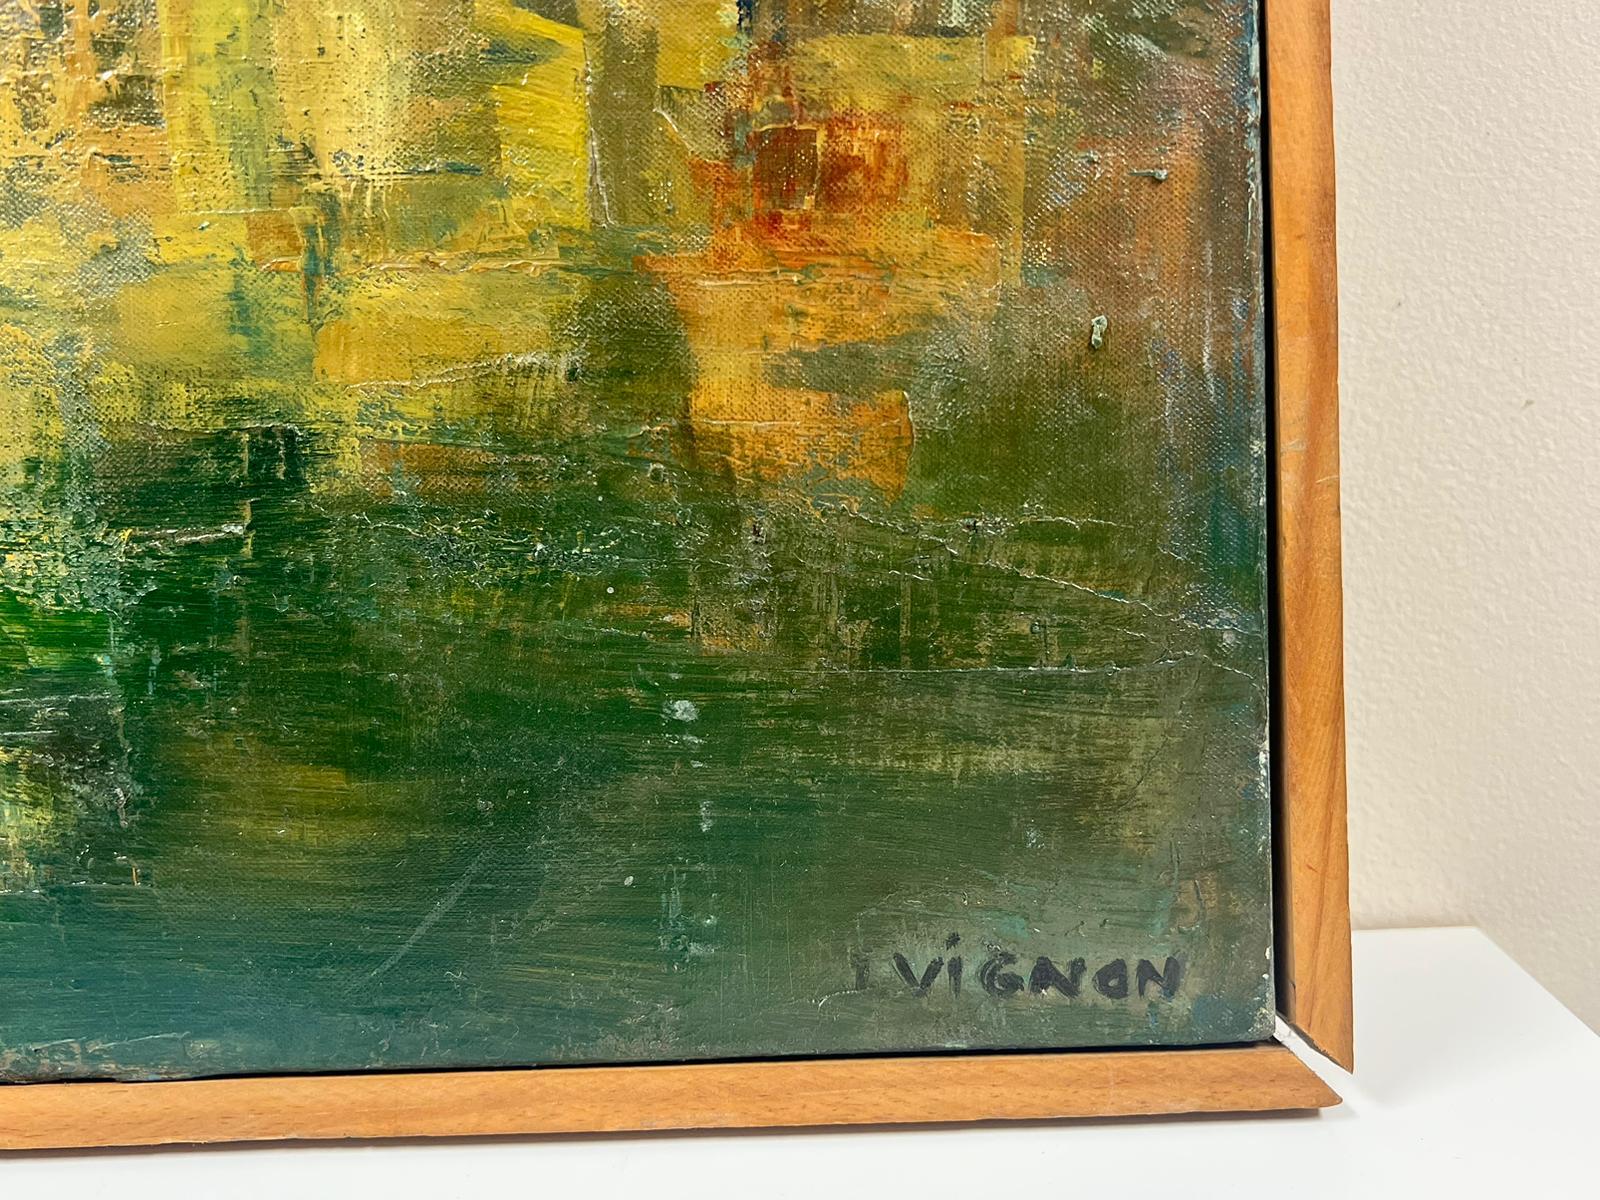 Vaucluse
signed by Josine Vignon (French 1922-2022) 
oil painting on canvas, in wooden frame
framed: 30 x 40
canvas: 29 x 39 inches
very good condition
provenance: the artists estate, France

Josine Vignon (1922-2022) was a French artist living on